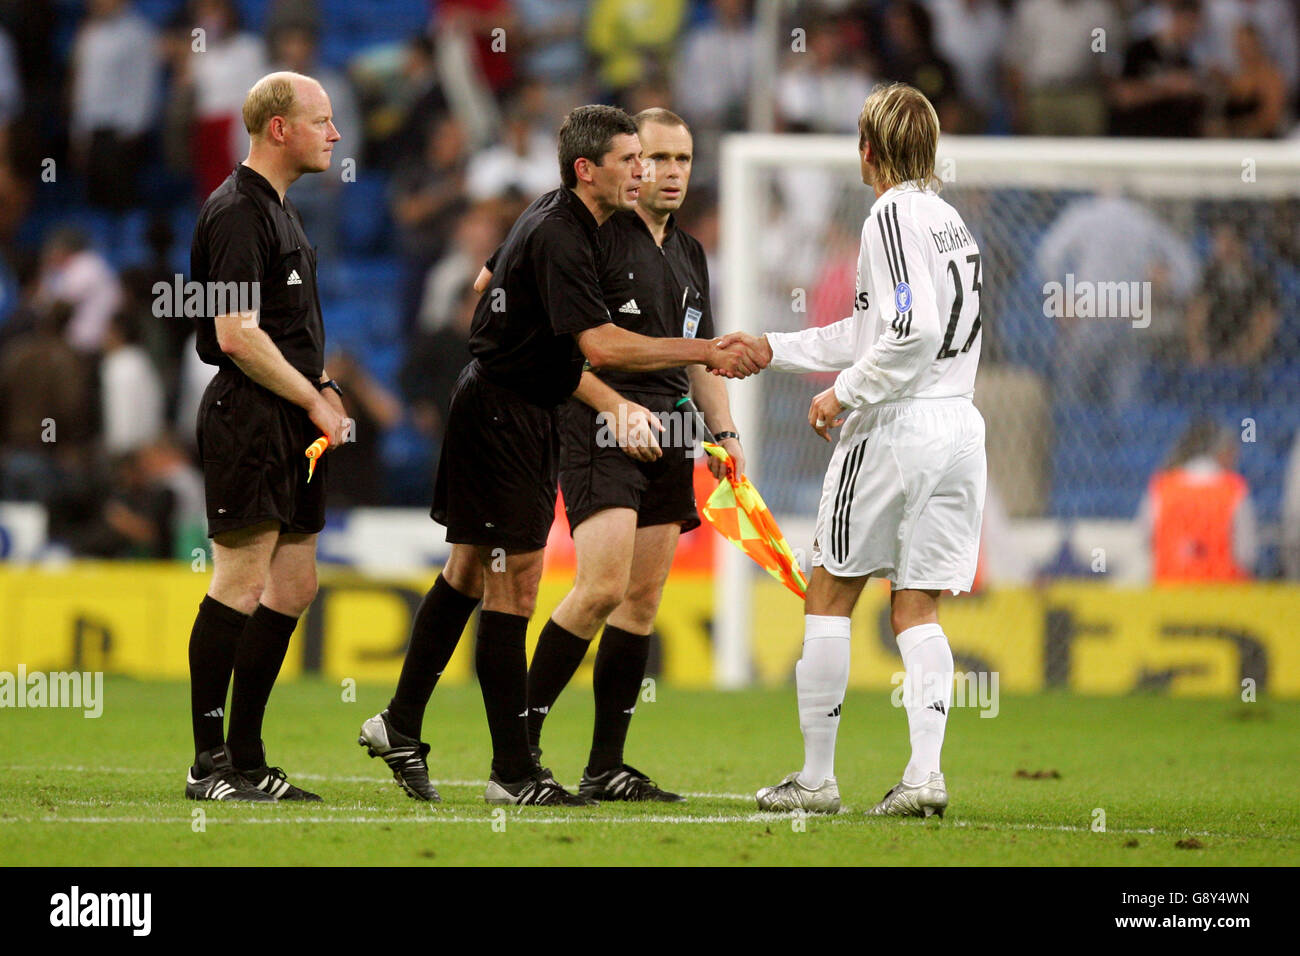 Shakes Hands With Referee High Resolution Stock Photography and Images -  Alamy